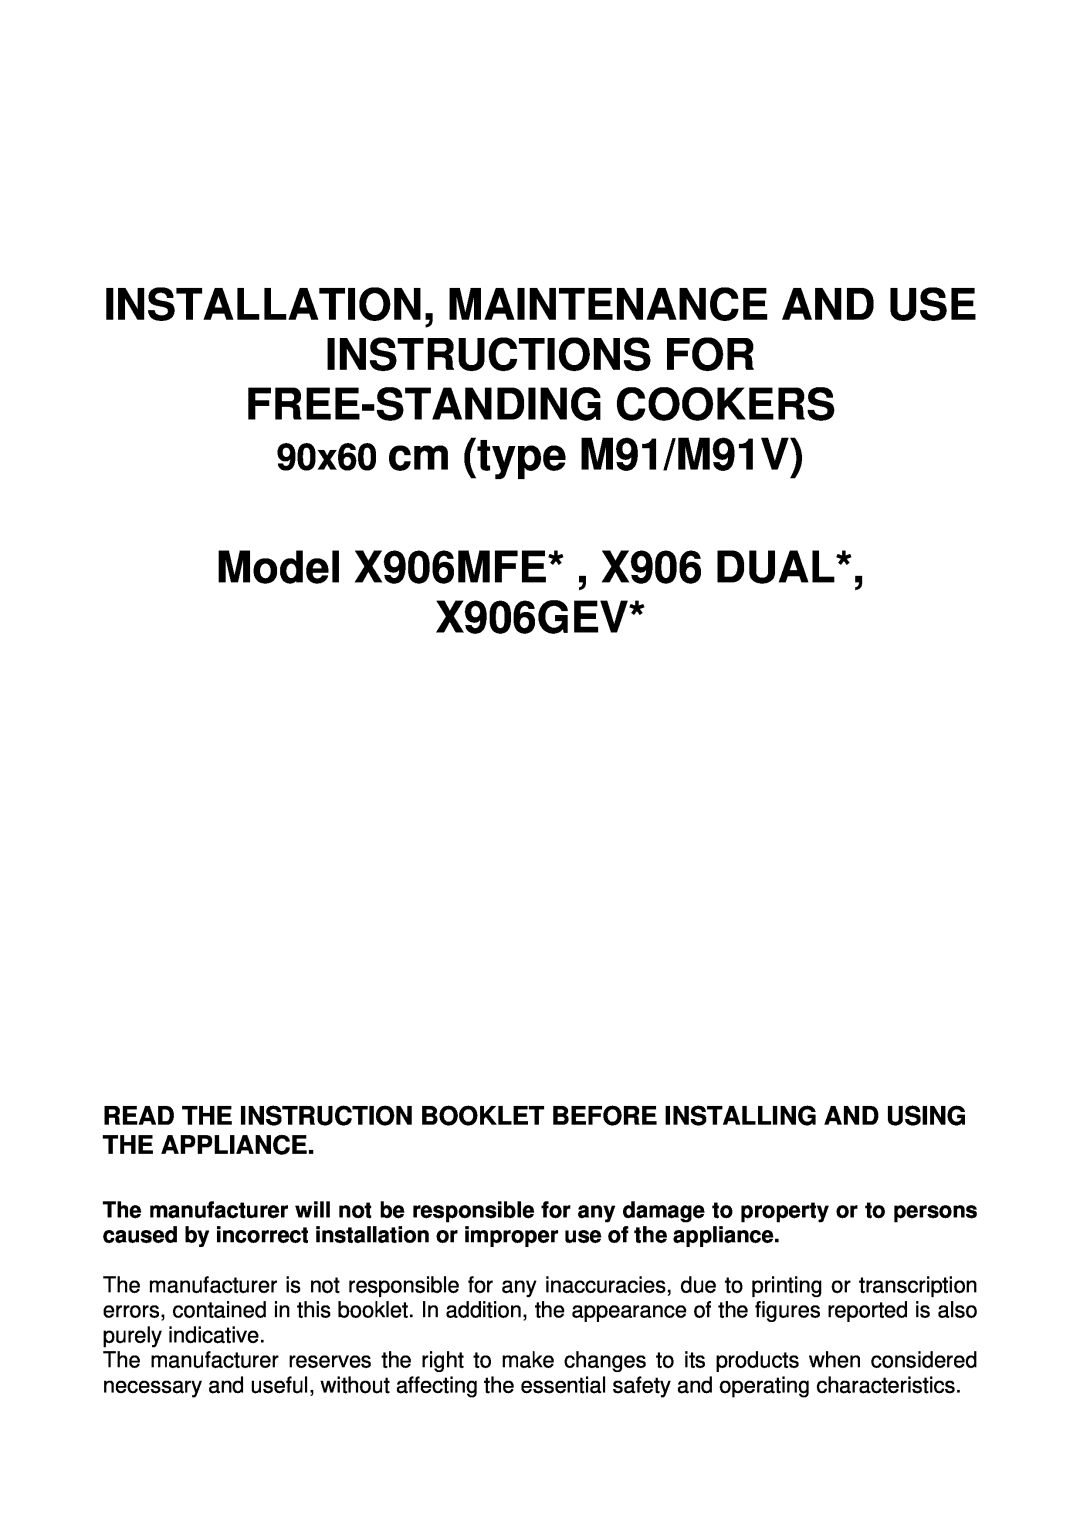 Bertazzoni X906MFE, X906 DUAL manual Installation, Maintenance And Use, Instructions For Free-Standingcookers, X906GEV 